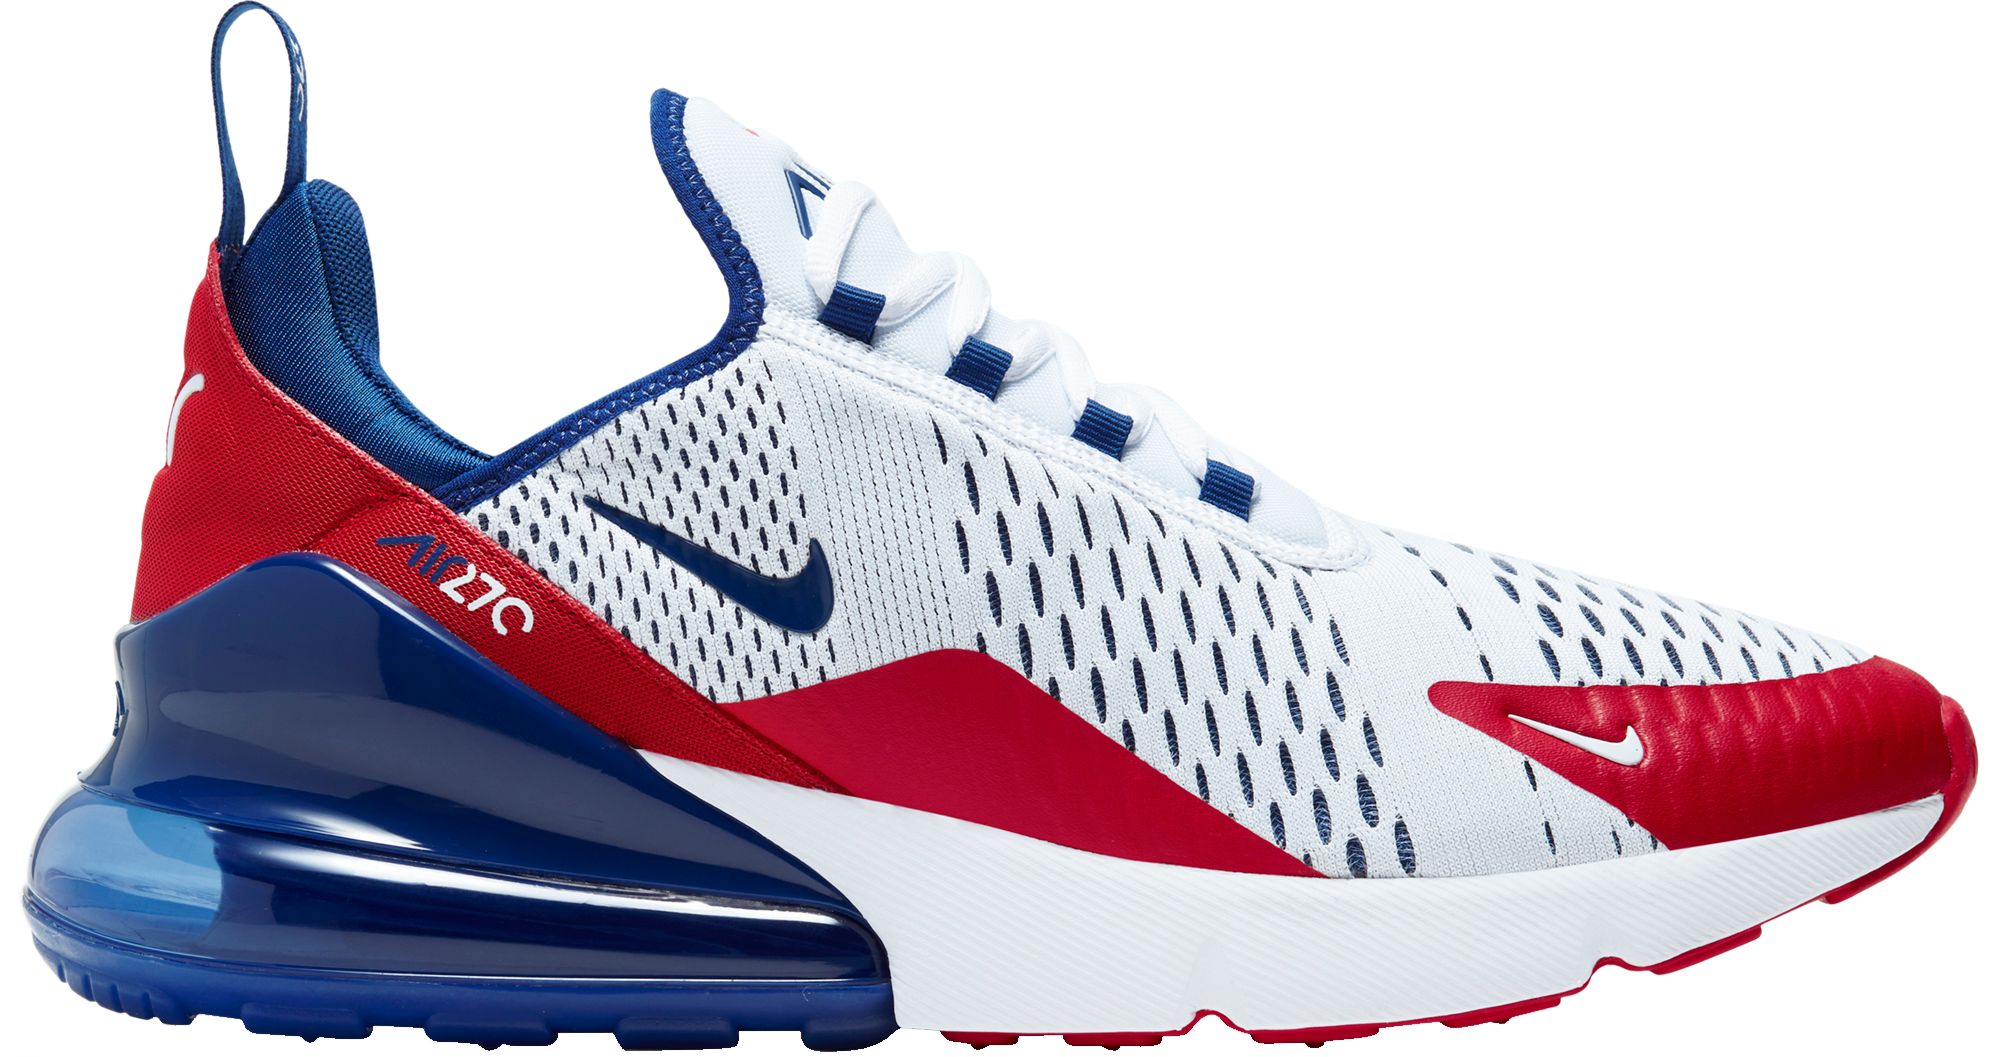 red white and blue air max 270s